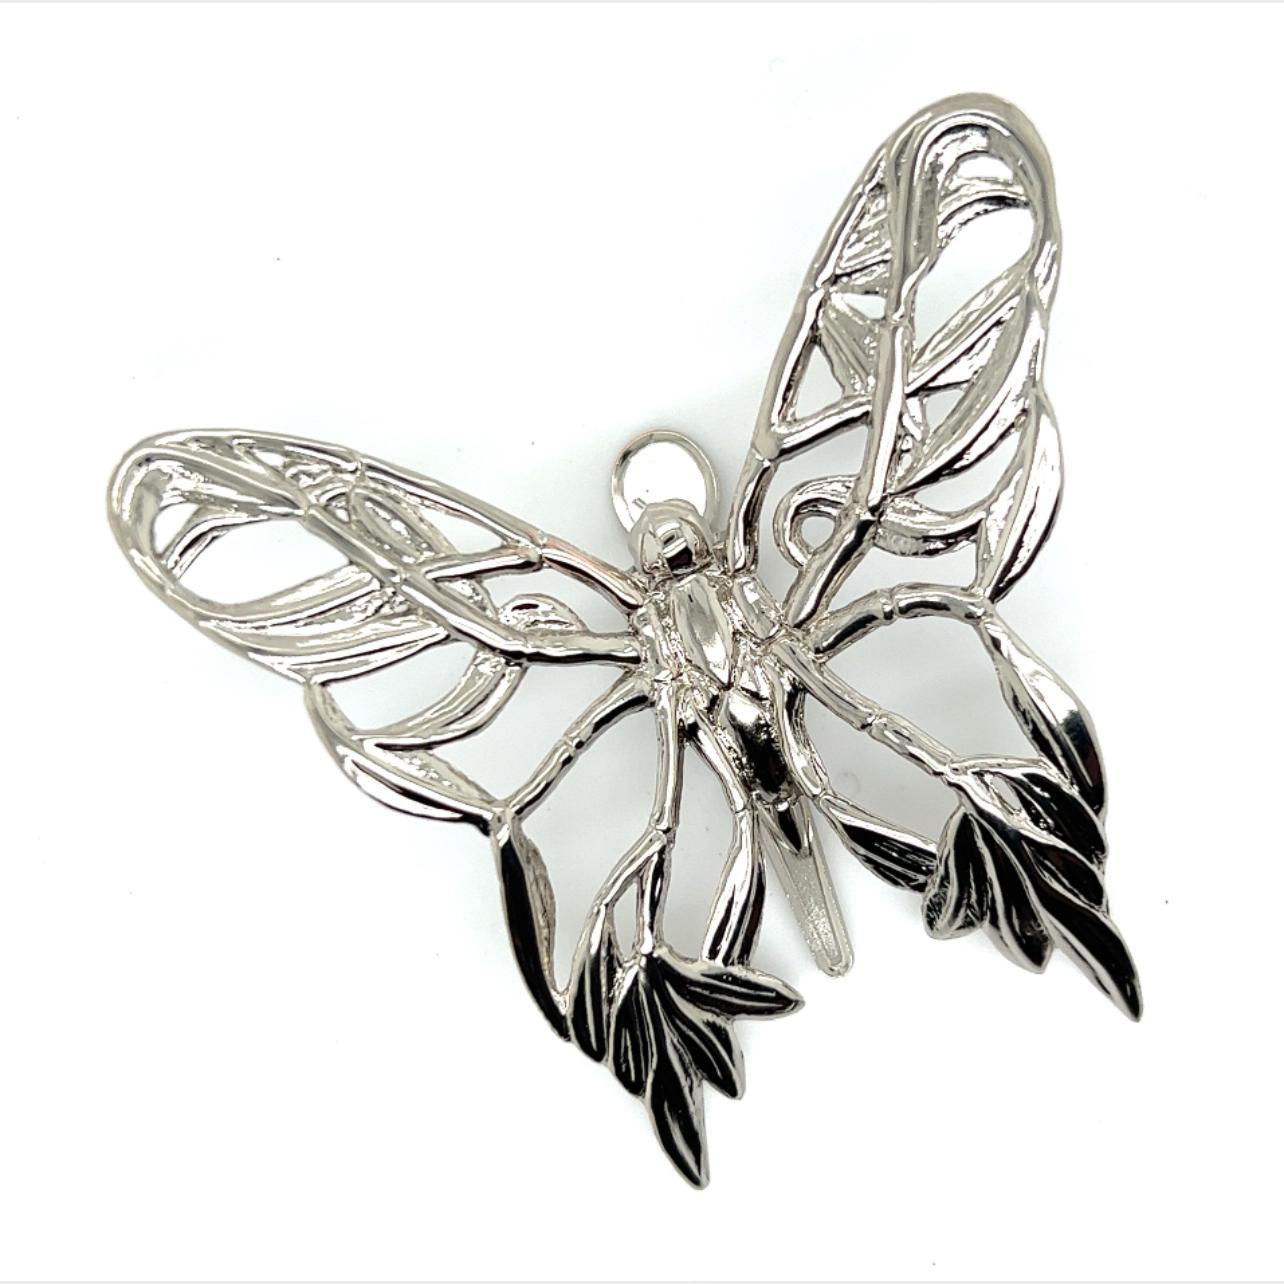 John Hardy Estate Ladies Butterfly Brooch & Scarf Clip Rhodium Plated JH8

TRUSTED SELLER SINCE 2002

PLEASE SEE OUR HUNDREDS OF POSITIVE FEEDBACKS FROM OUR CLIENTS!!

FREE SHIPPING!!

DETAILS
Style: Butterfly
Weight: 19.5 Grams
Metal: Rhodium